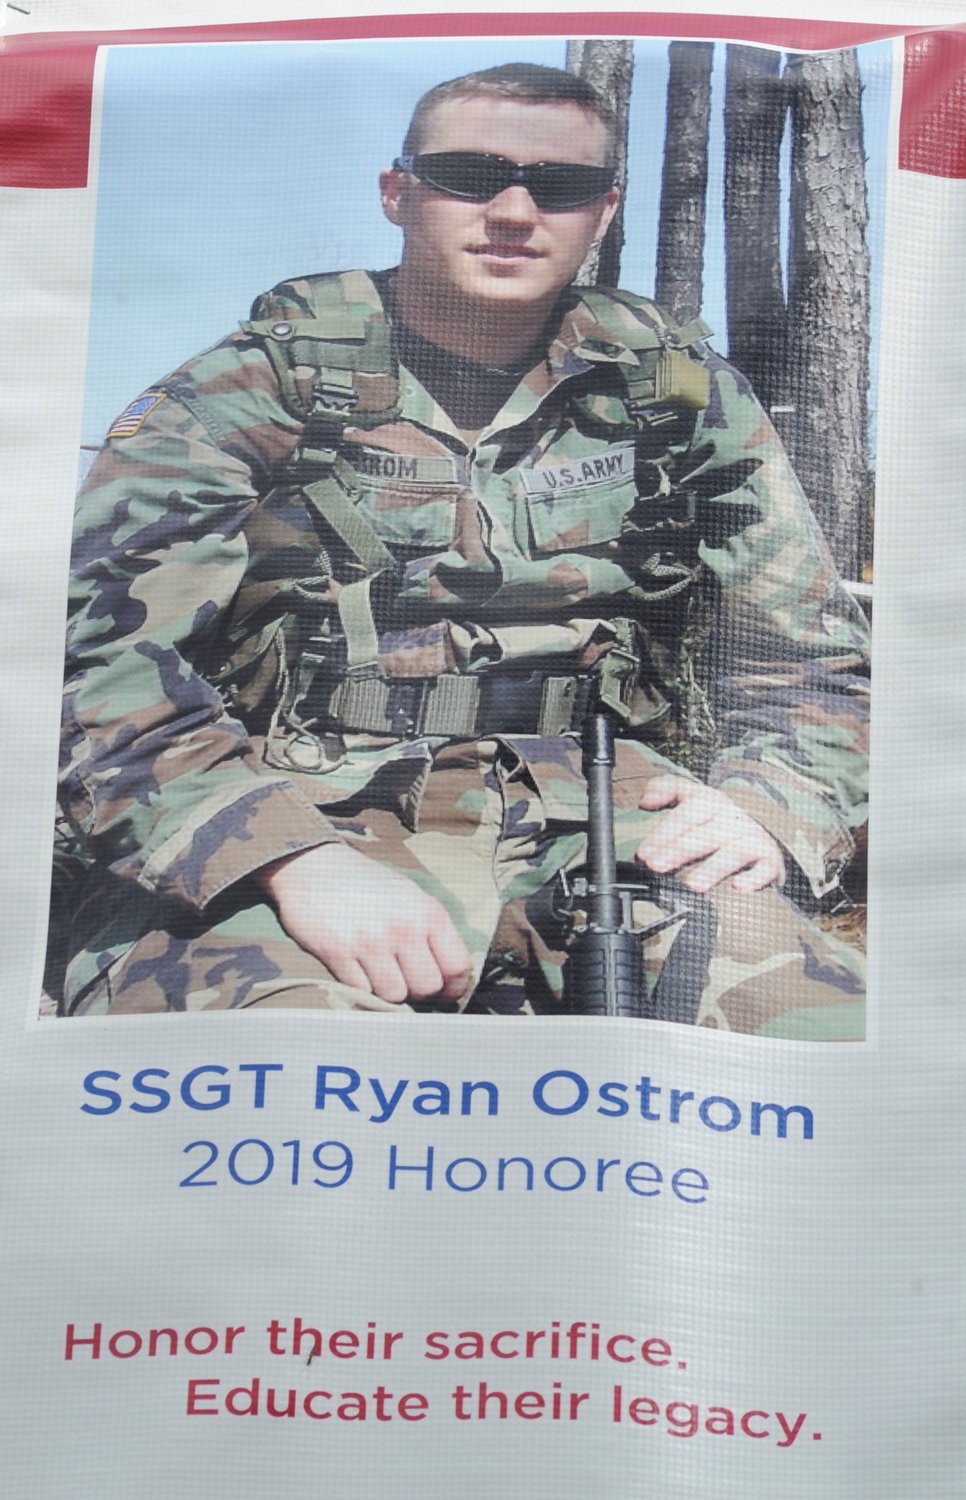 Fallen comrade. SSGT Ryan Ostrom was honored at the 2019 Folds of Honor Golf Classic. He was reportedly killed by a sniper before SSGT Strasser lost six friends when a Bradley Fighting Vehicle hit an IED in Iraq.